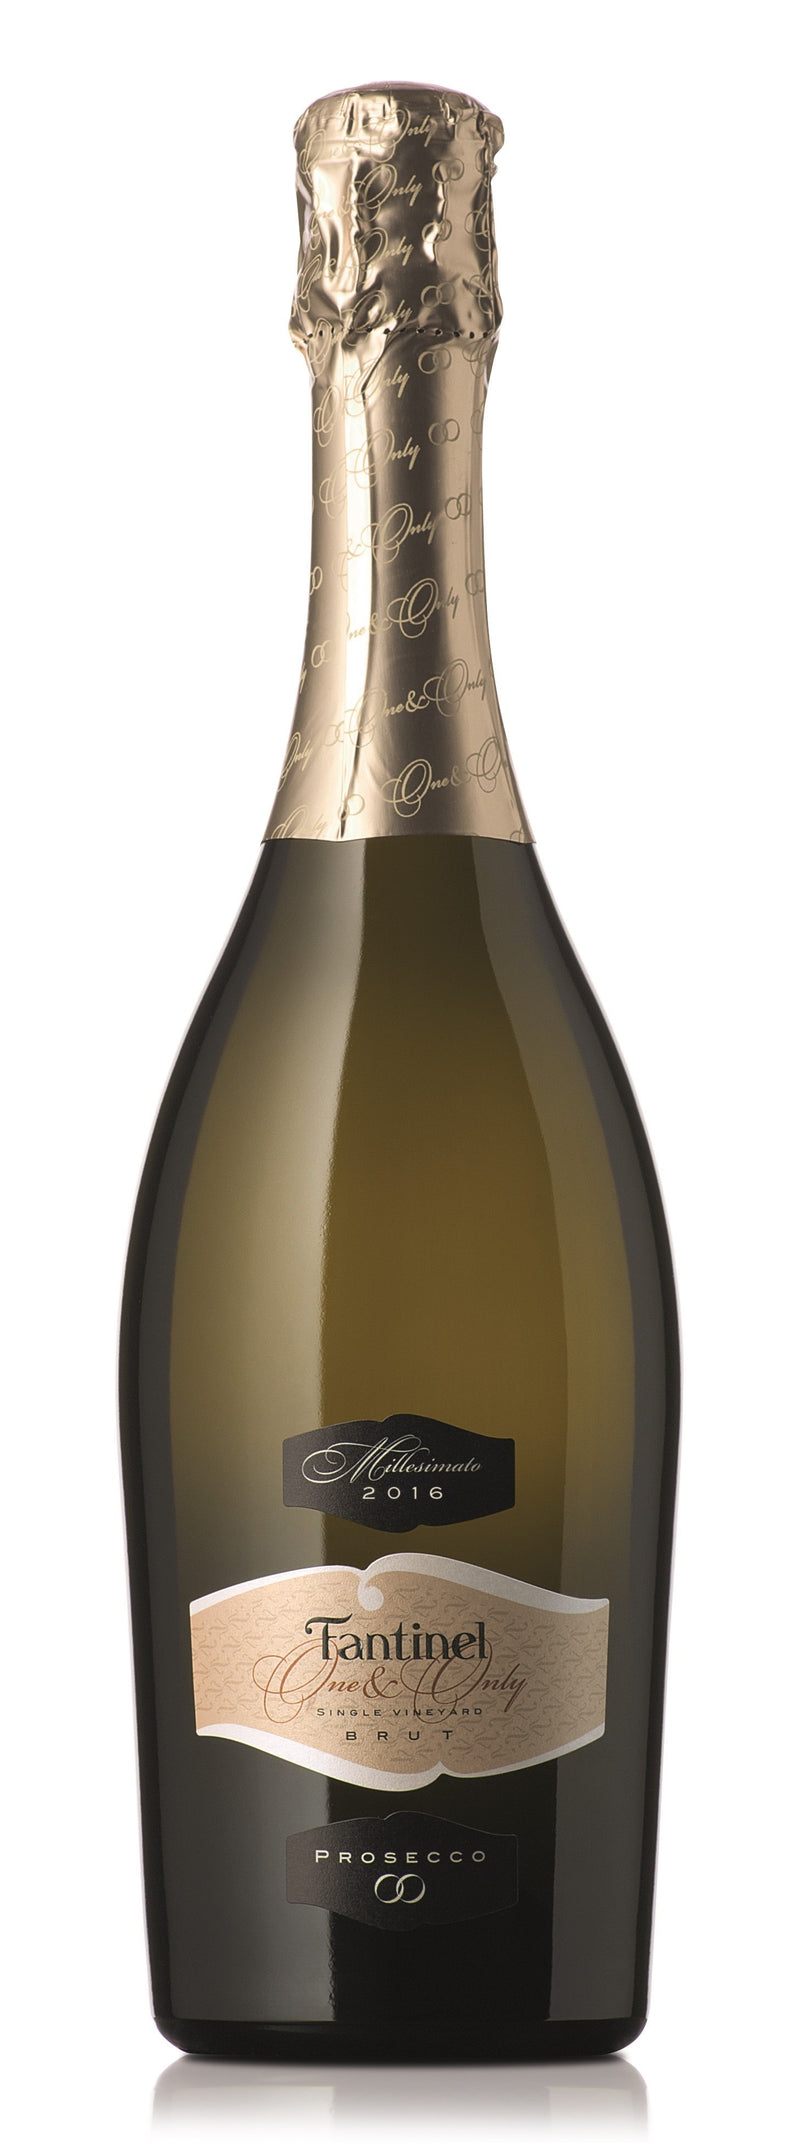 Fantinel Prosecco Brut One & Only Millesimato 2021